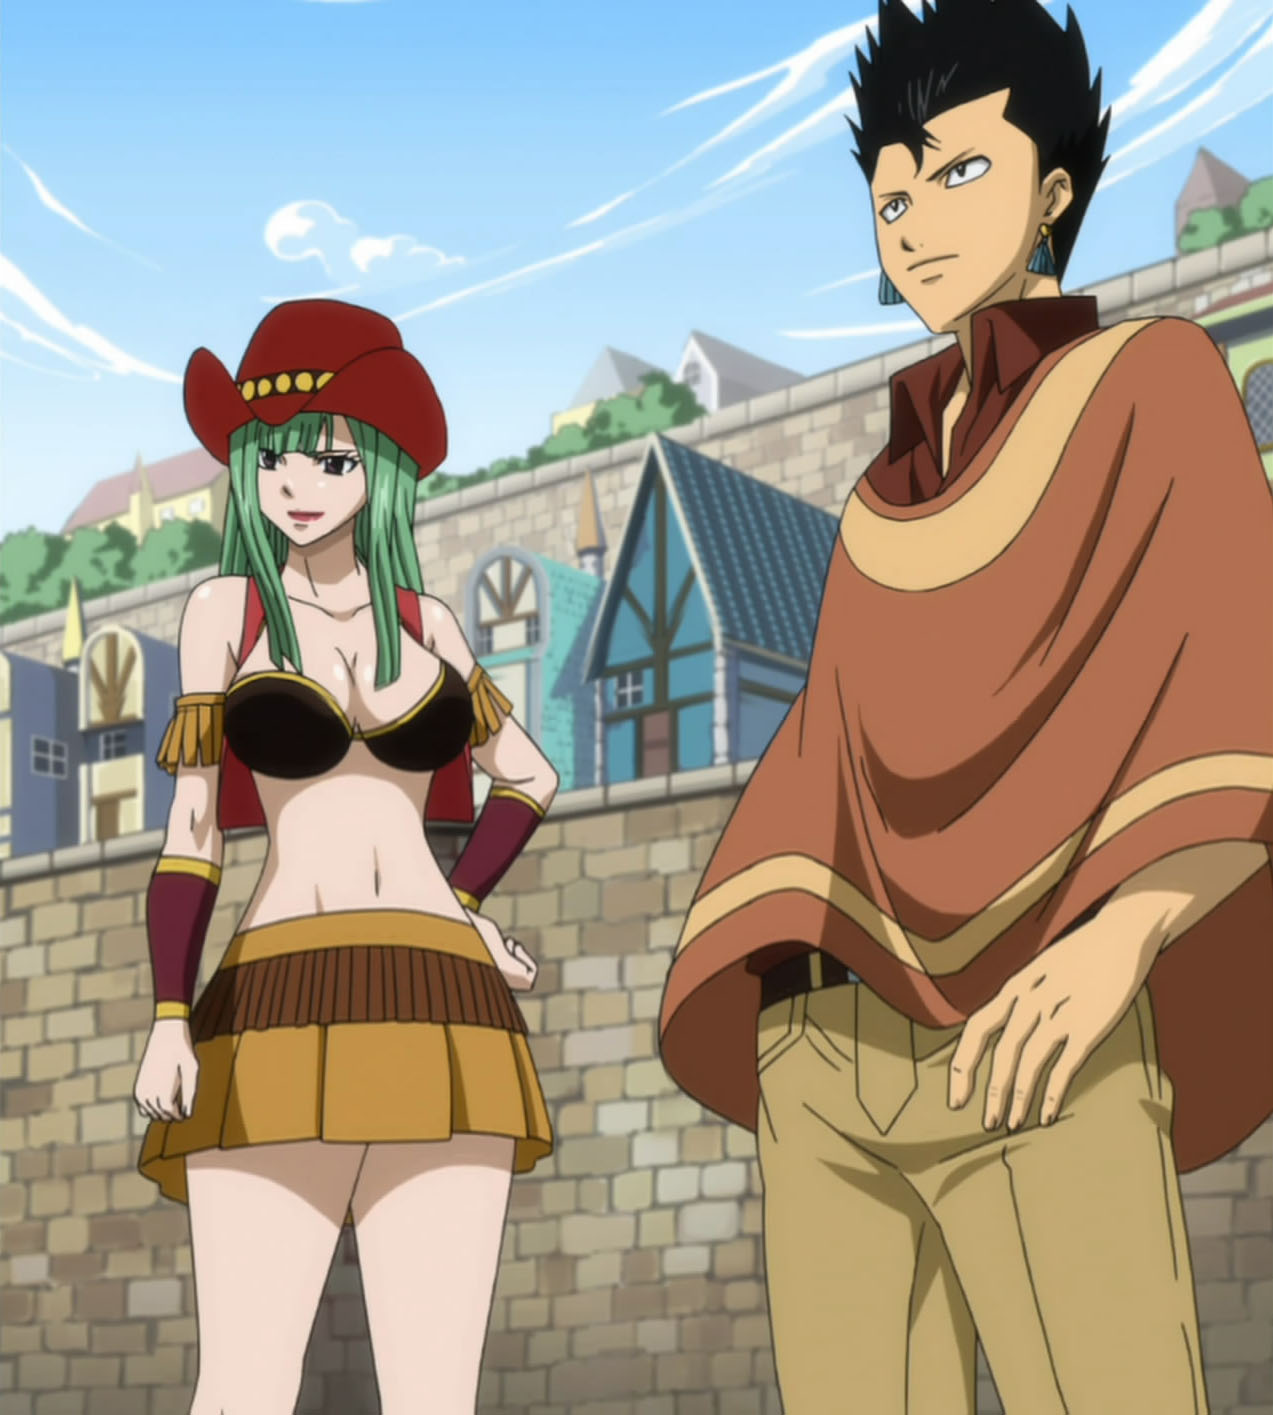 Fairy tail episode 123 resume